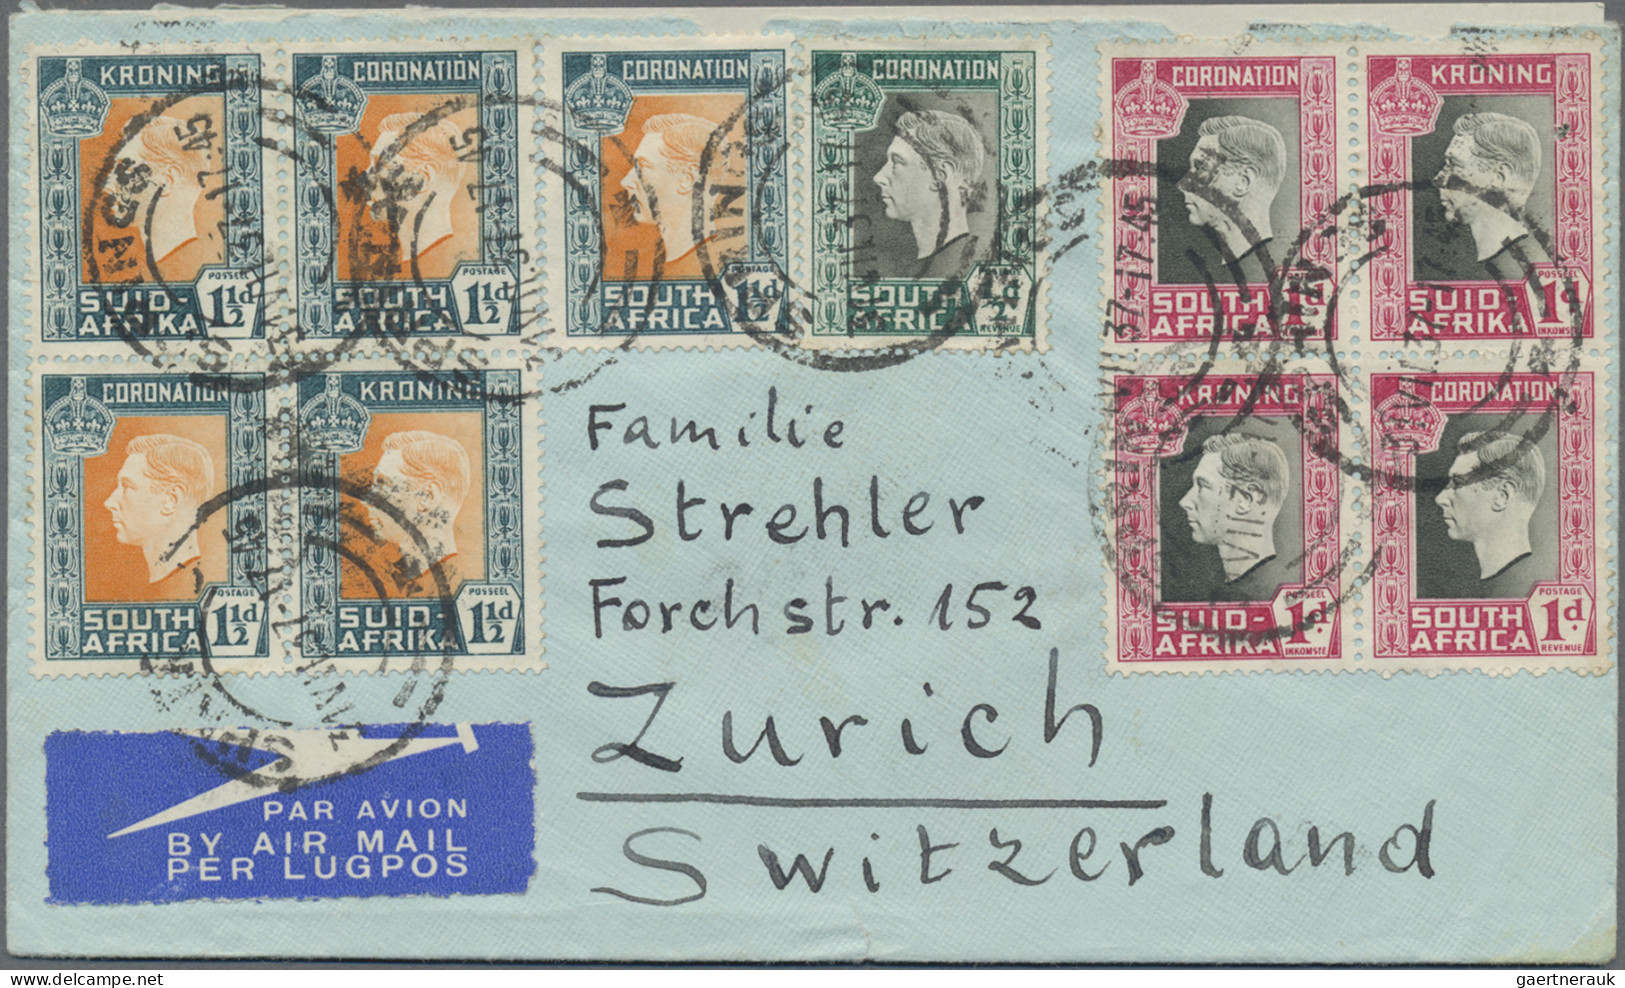 South Africa: 1916/1980, mainly up to 1950s, assortment of apprx. 143 covers/car